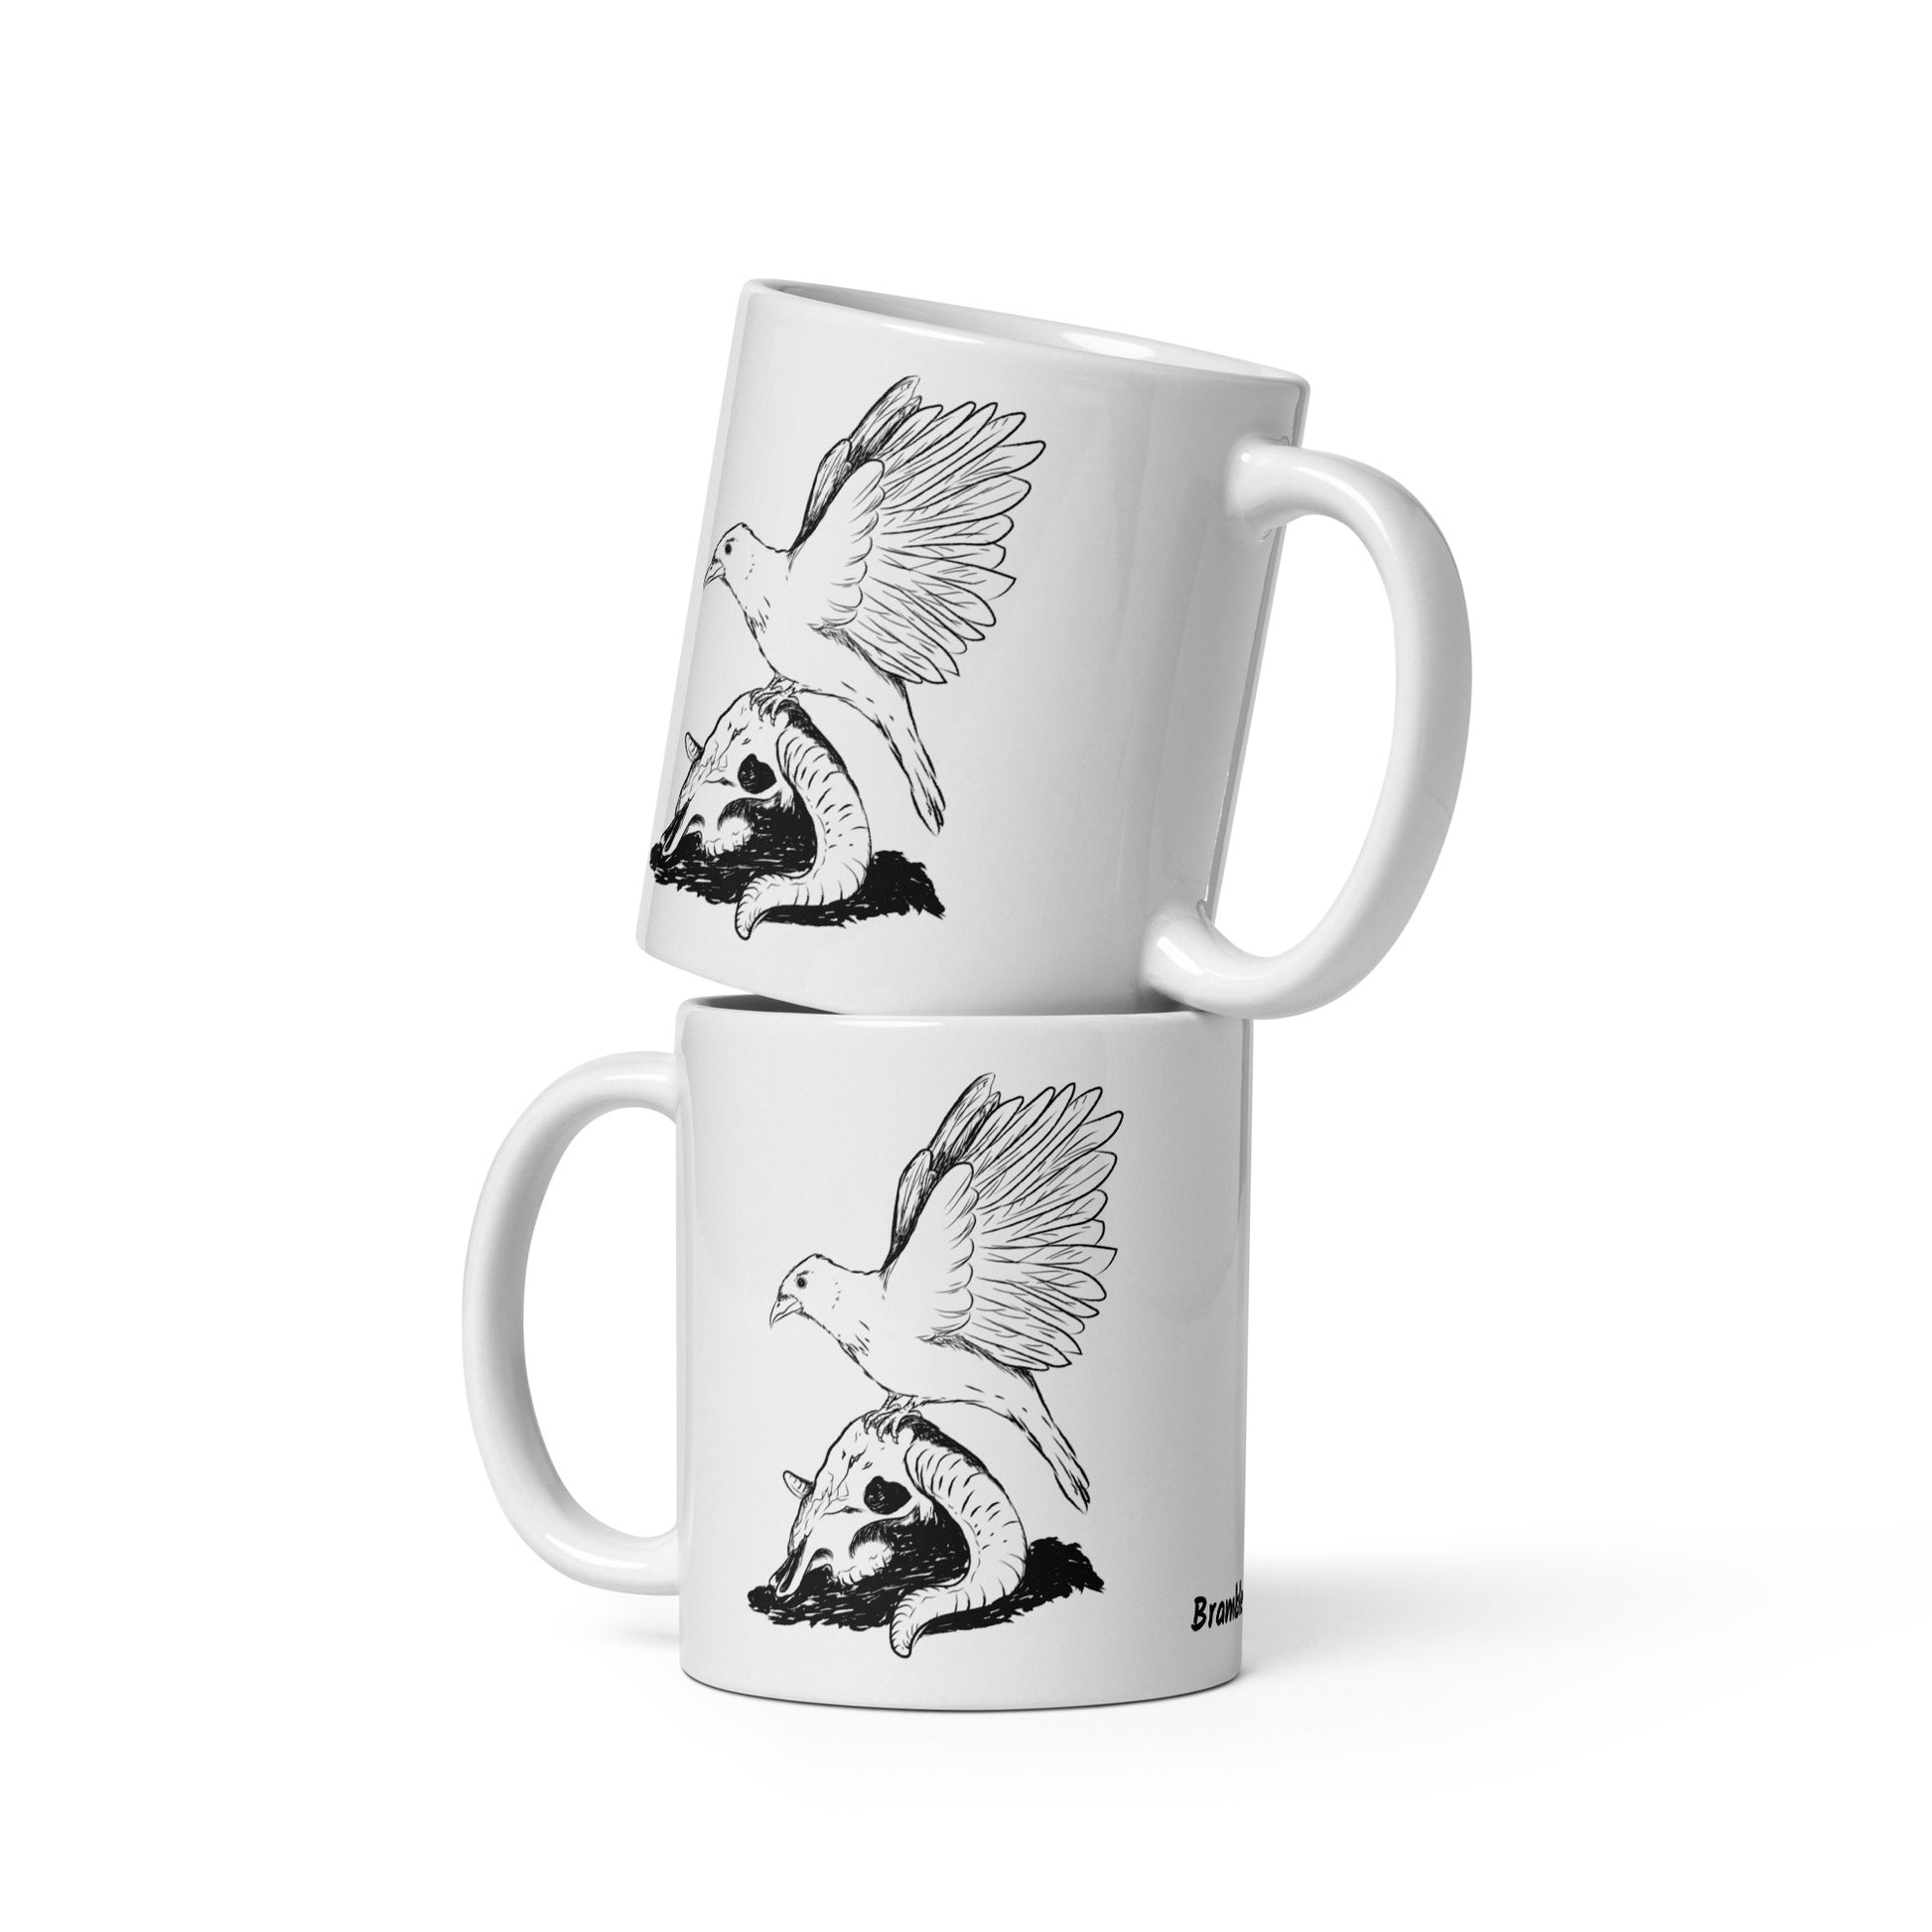 11 ounce white glossy mug featuring double sided print of Reflections, a design with a crow with wings outstretched on a sheep skull. Two mugs shown stacked on each other.